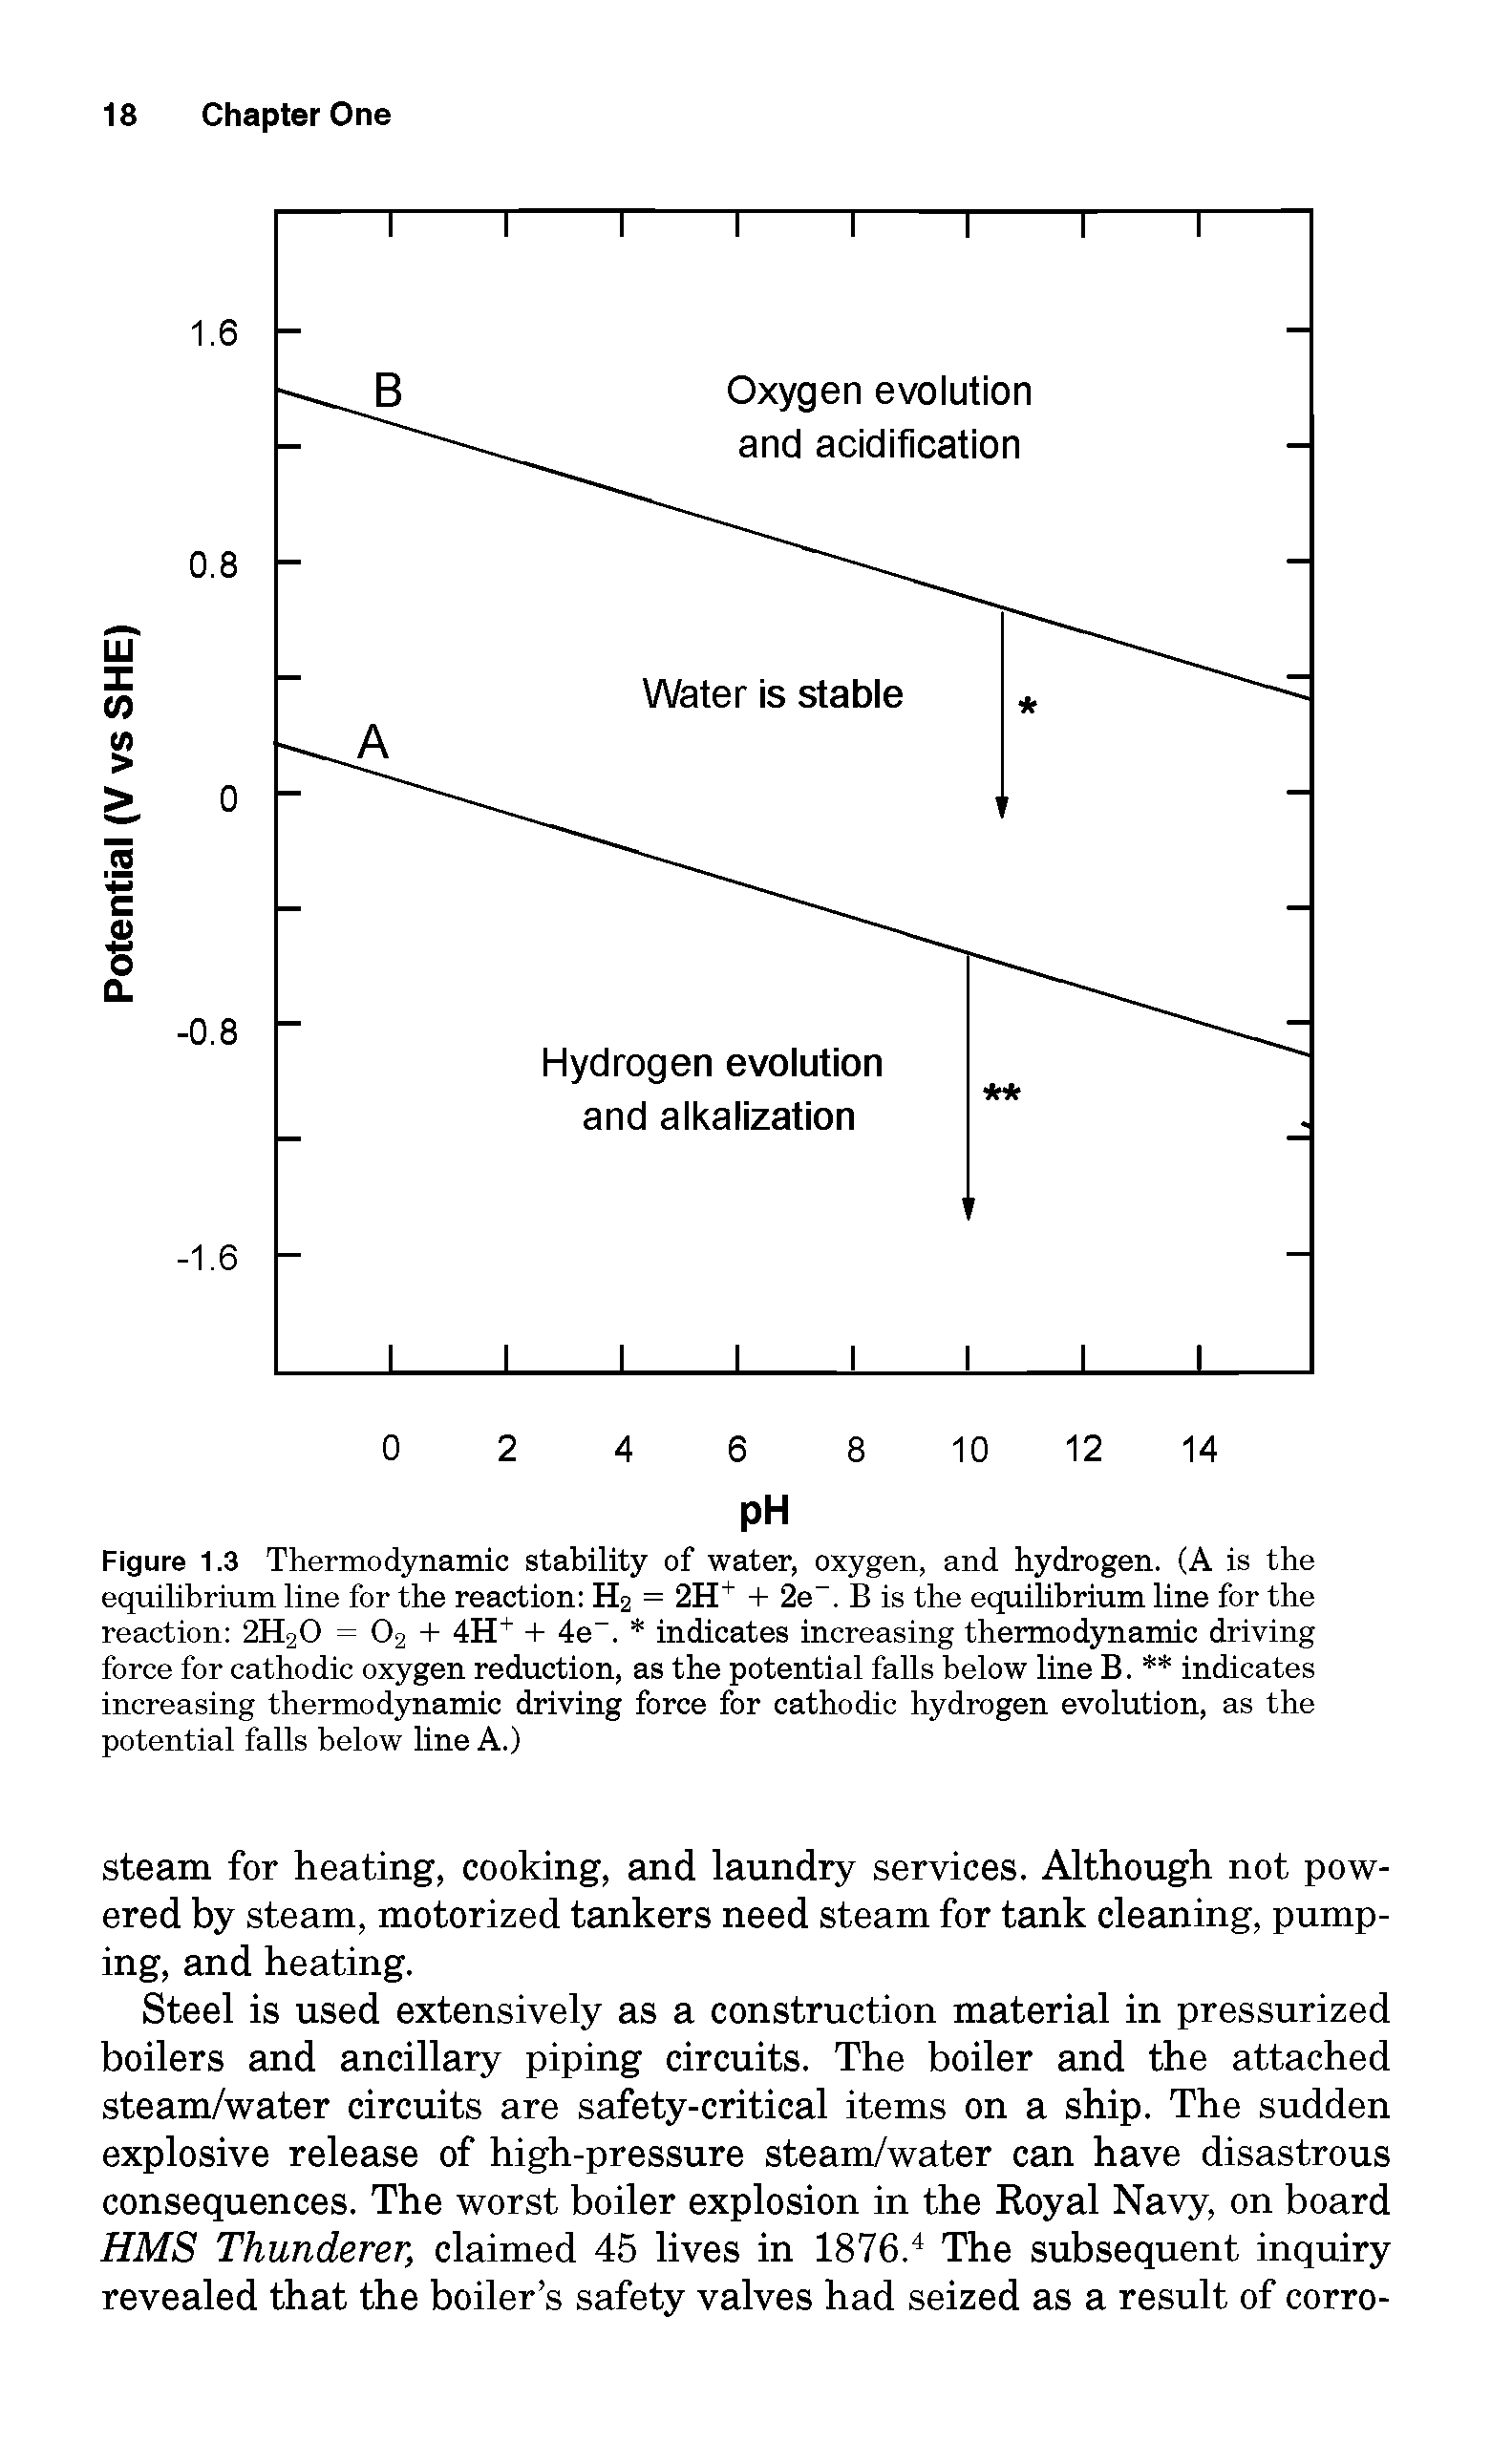 Figure 1.3 Thermodynamic stability of water, oxygen, and hydrogen. (A is the equilibrium line for the reaction H2 = 2H + 2e . B is the equilibrium line for the reaction 2H2O = 62 + 4H+ + 4e . indicates increasing thermodynamic driving force for cathodic oxygen reduction, as the potential falls below line B. indicates increasing thermodynamic driving force for cathodic hydrogen evolution, as the potential falls below line A.)...